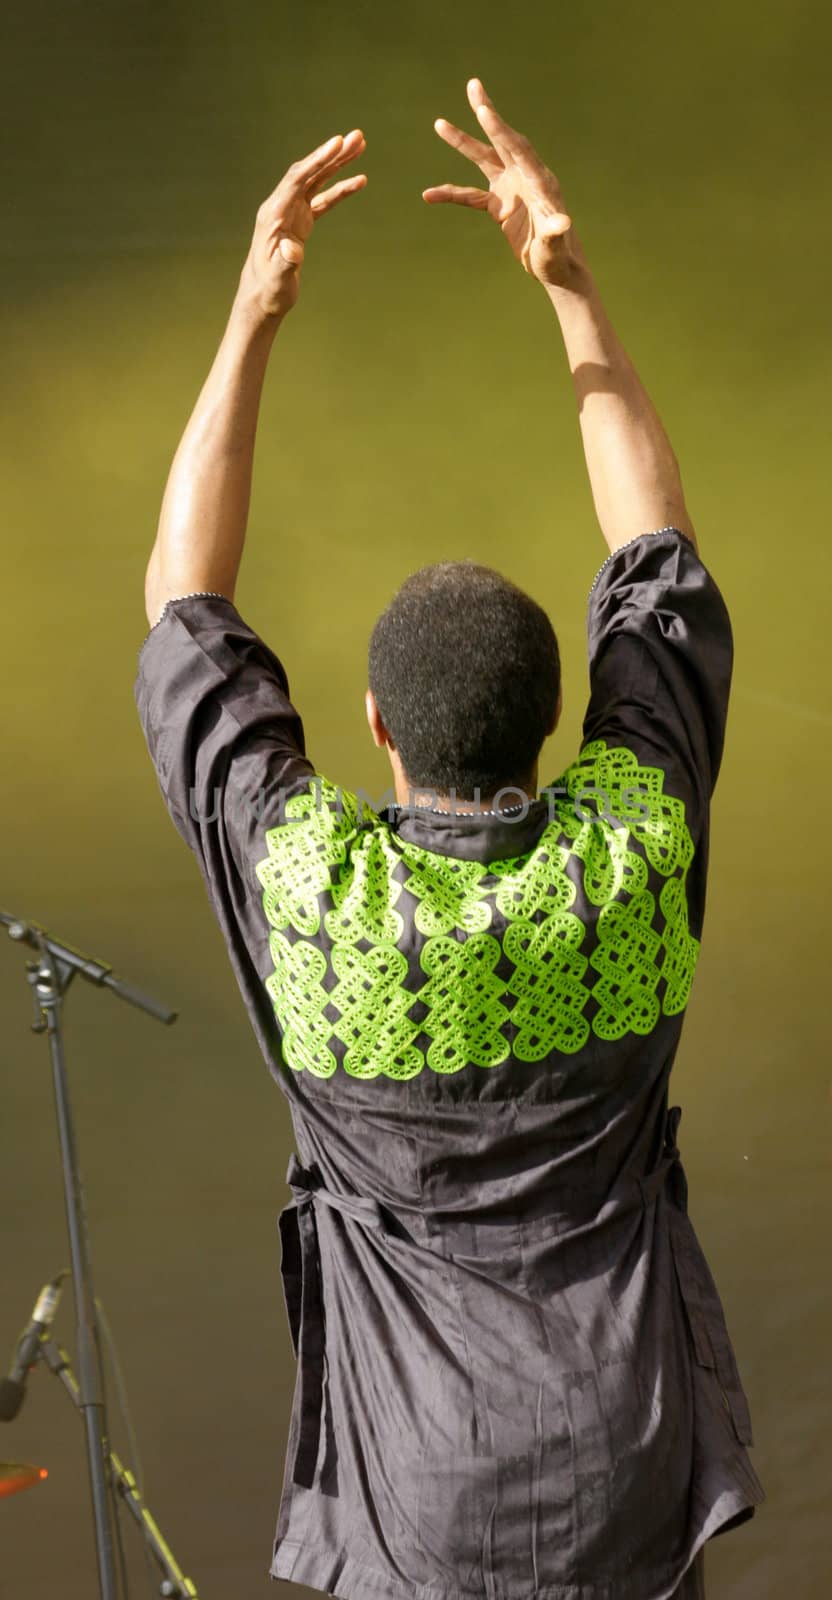 singer at the microphone during a music festival by macintox